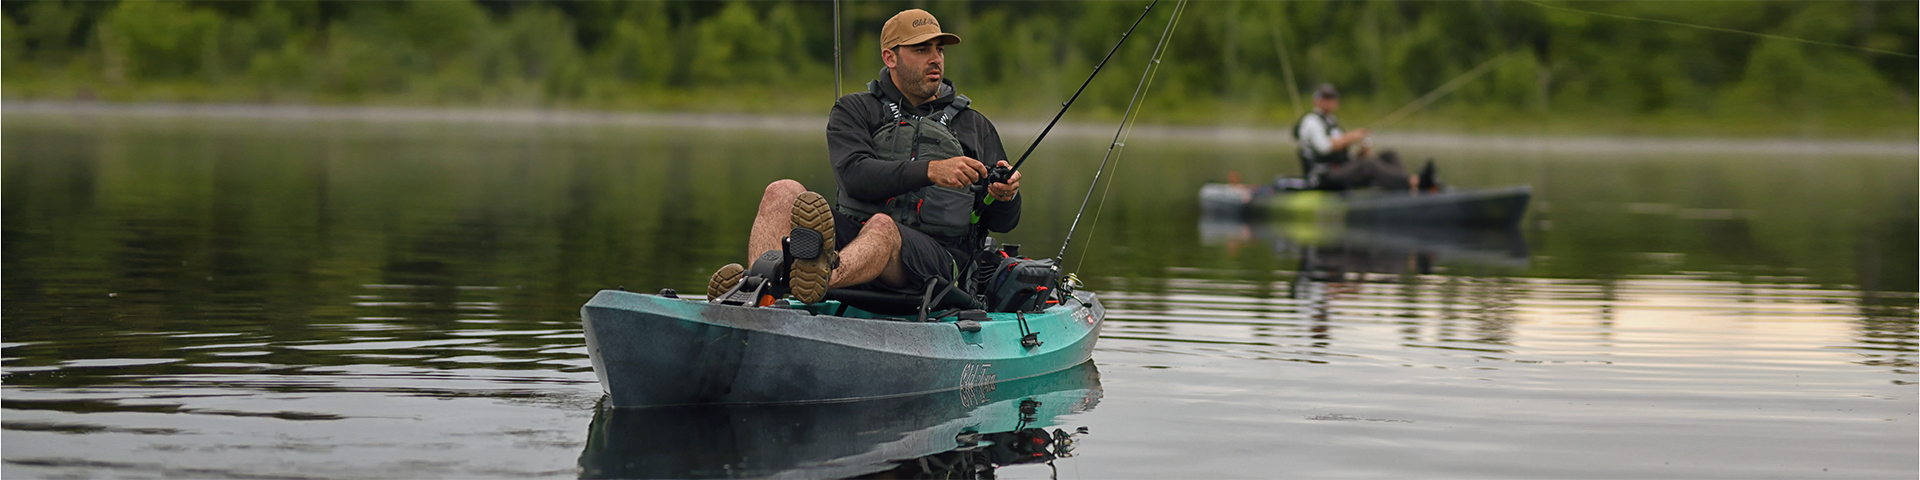 A Beginner's Guide To Inshore Kayak Fishing - Old Town